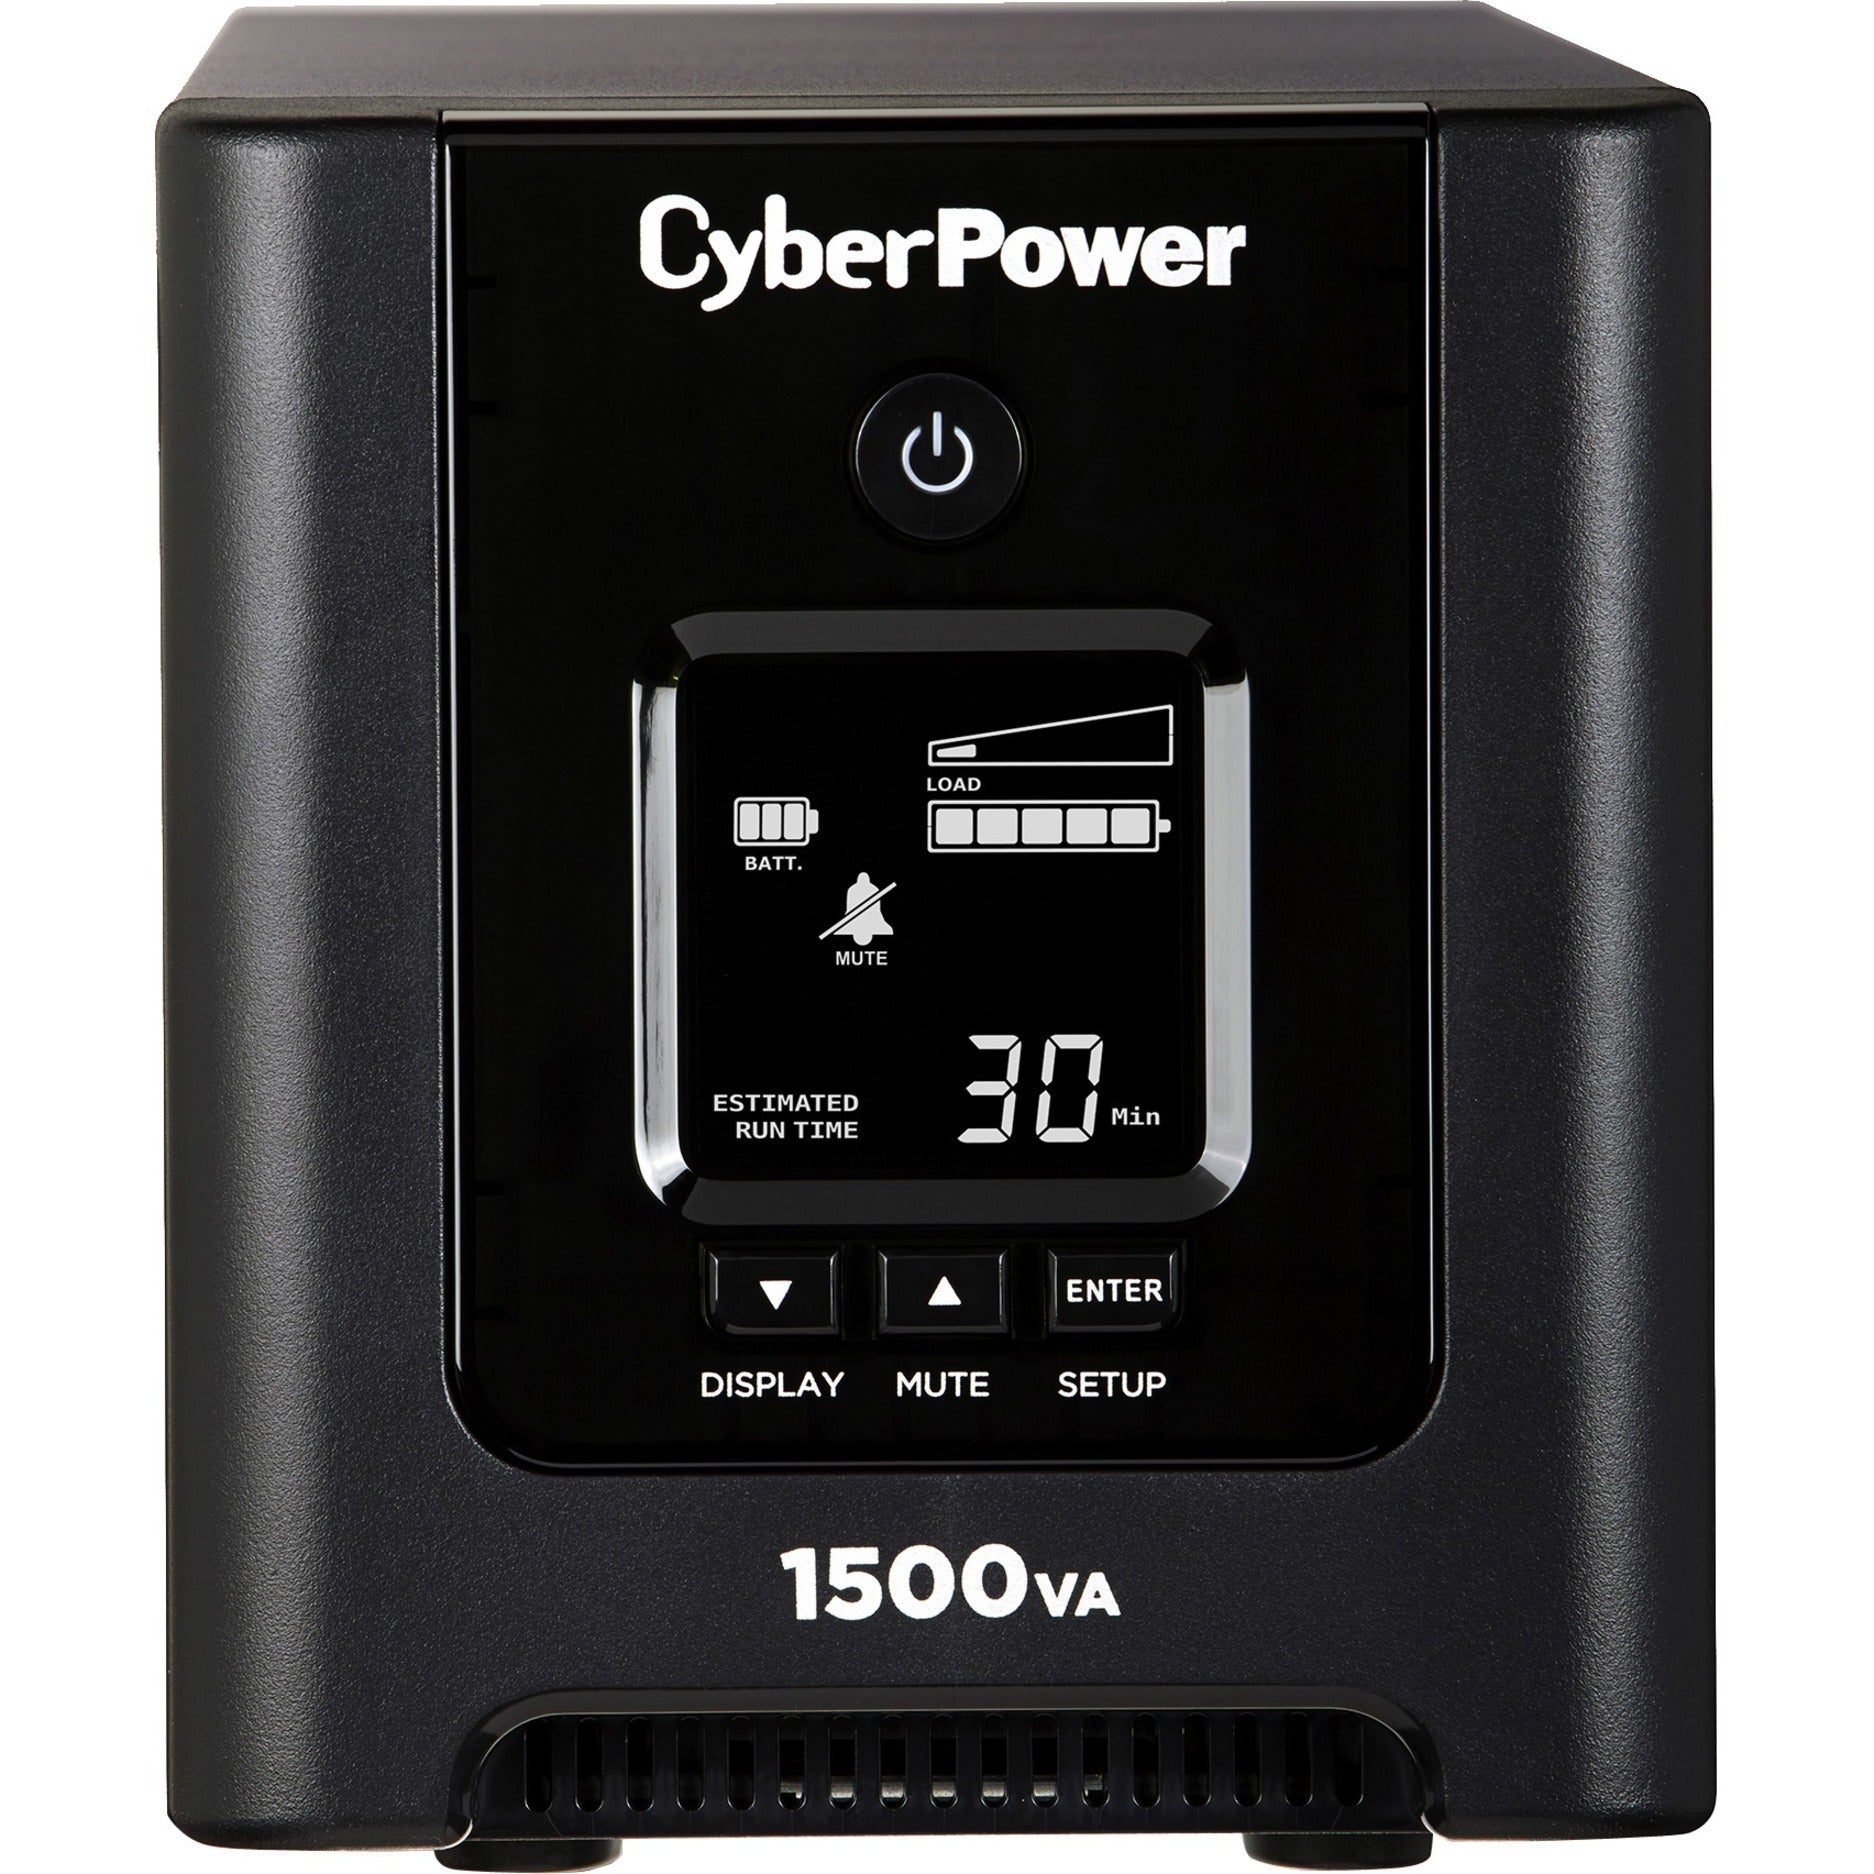 CyberPower OR1500PFCLCD PFC Sinewave UPS Systems, 1500VA 1050W, 3 Year Warranty